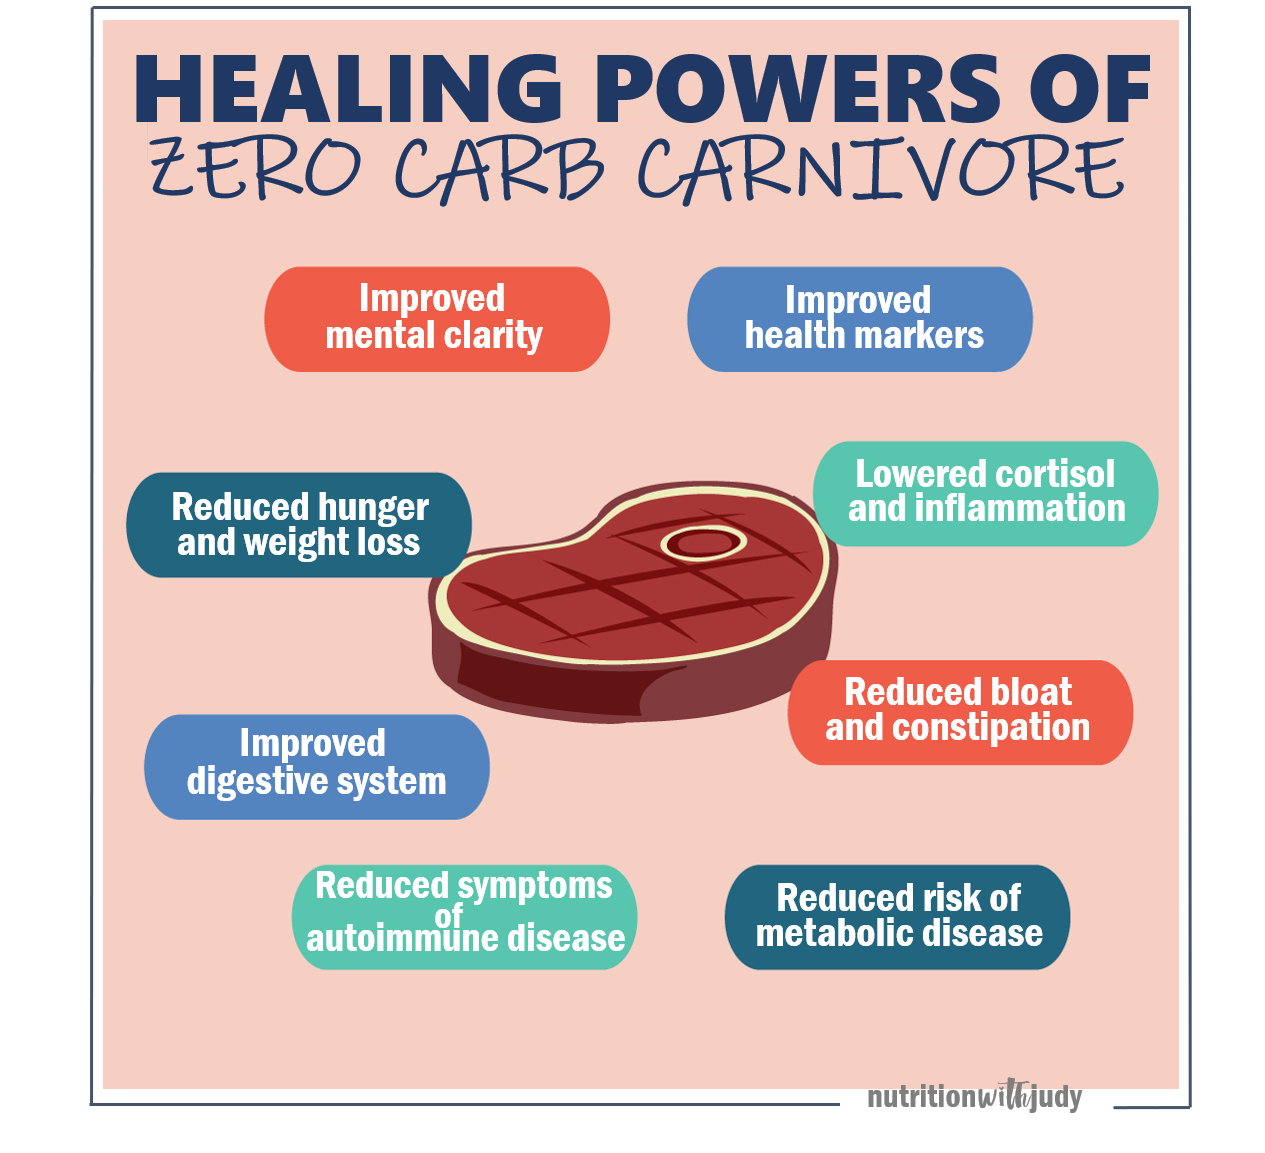 Carnivore Diet for Beginners — How to Start the Zero-Carbohydrate Carnivore Diet1265 x 1153